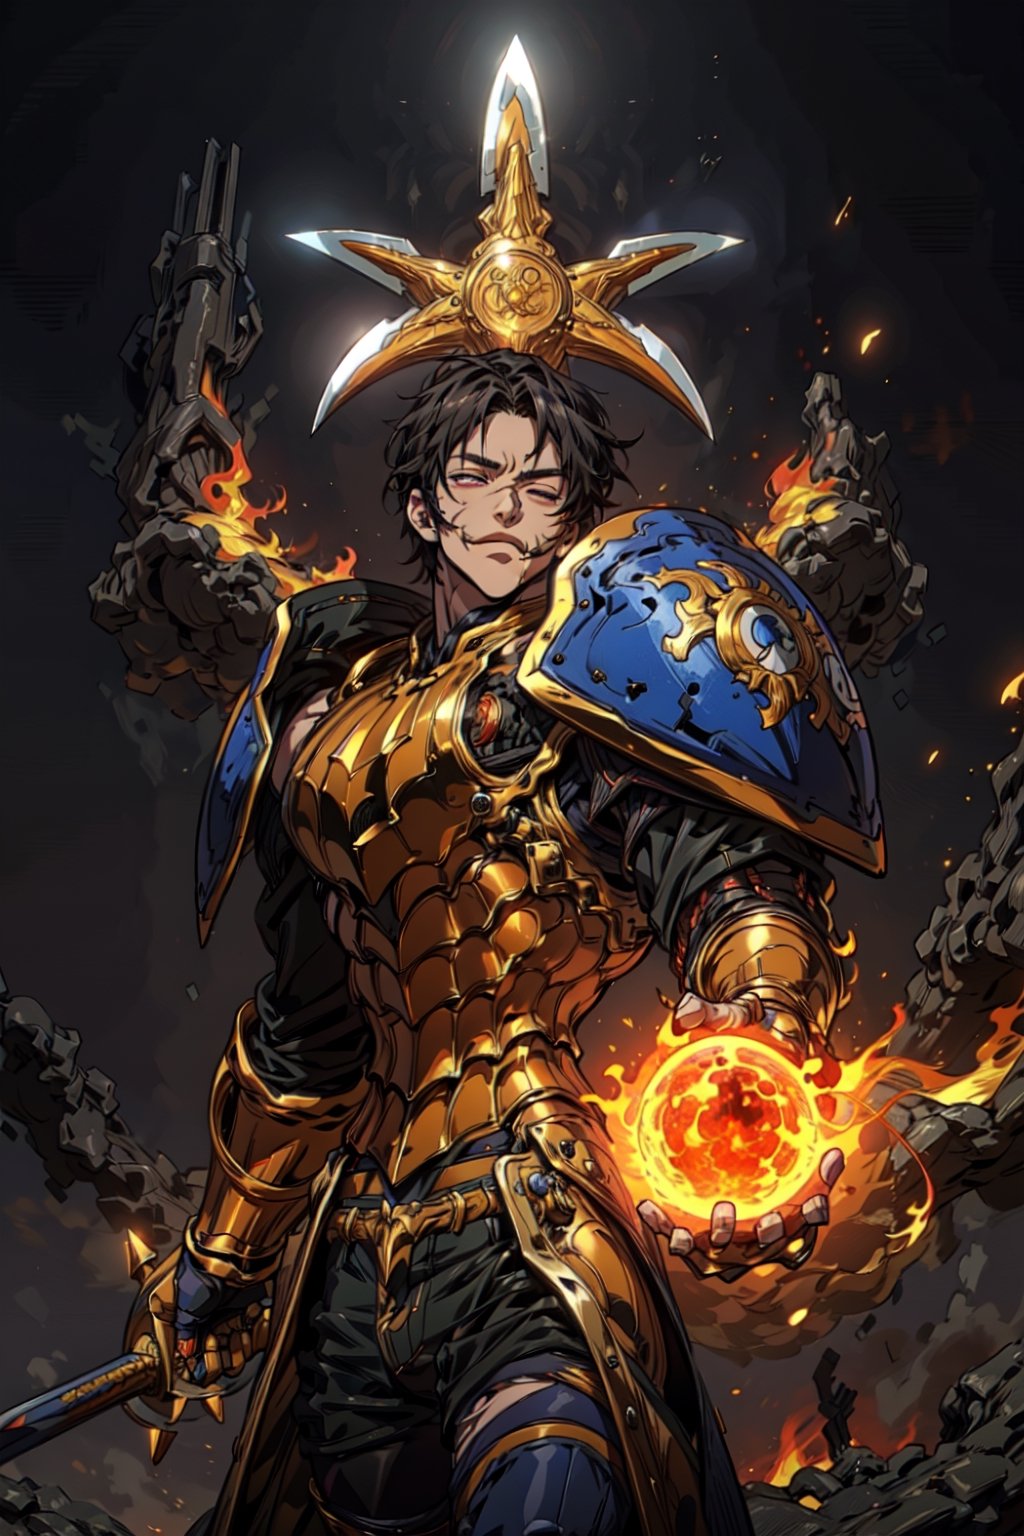 Wide and detailed shot of the entire body of "esacnor" in his golden armor, brandishing a giant (ritta axe) that is twice his size, the left arm has golden colored armor and is mechanical with a hidden high-quality weapon technology. , scars and battle damage, known as the "lion of pride", a scarred former mercenary and wanderer who travels the world even as his inner darkness festers deep within him and his temptation becomes increasingly difficult to resist. resist, retains his empathy and compassion, refusing to discard his humanity (8k, ultra best quality, masterpiece: 1.2), ultra detailed, best shadow, detailed hand, hyper-realistic portraits (detailed background), glowing right eye. God's hand. Eclipse. His defining ability is his mastery of the Buster Sword like Cloud from Final Fantasy 7. Place him against a background of a raging fire with black flames dancing in the background, a black crow flying, creating a hellish atmosphere. ((Perfect face)), ((perfect hands)), ((perfect body)), traditional means, guts \(crazy\), one eye closed